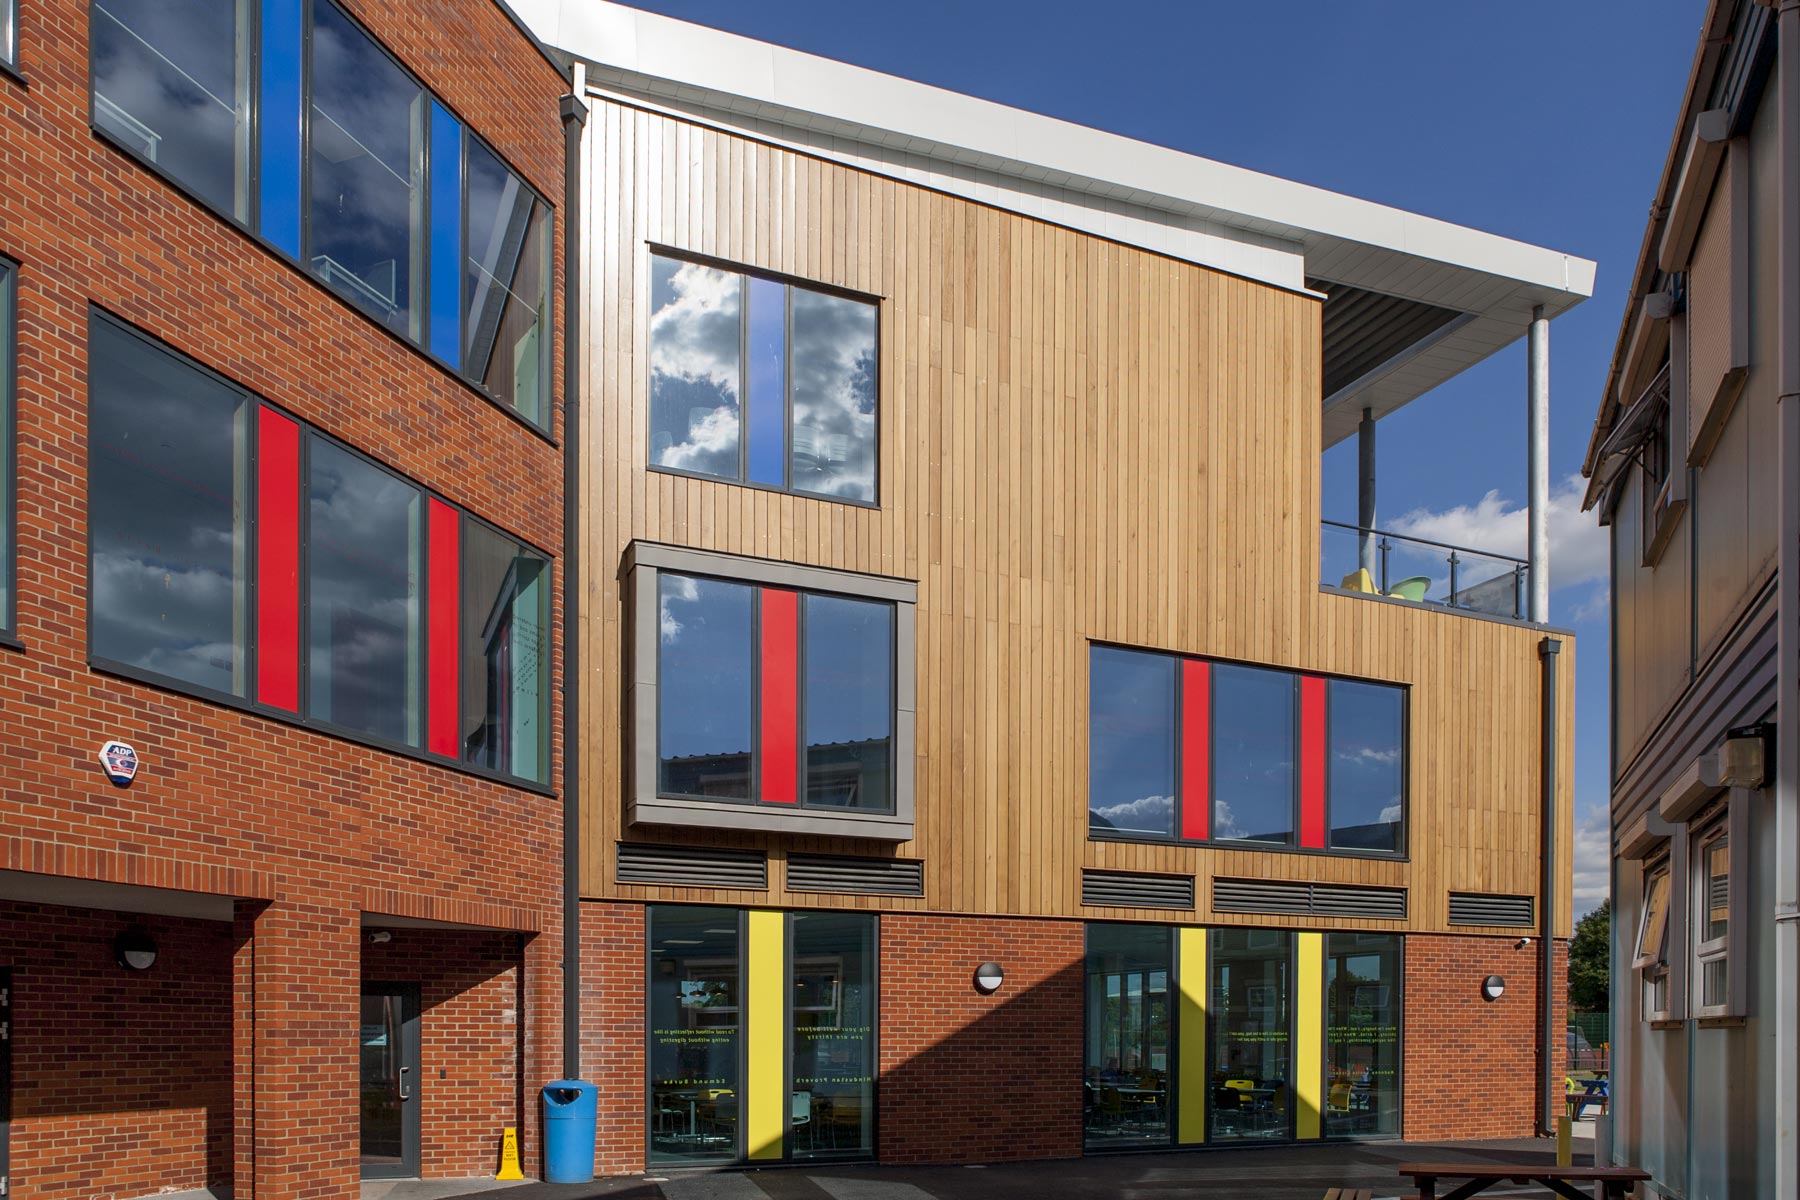 Tolworth Girls' School Sixth Form Centre - Timber, Brick and Glazed Facade